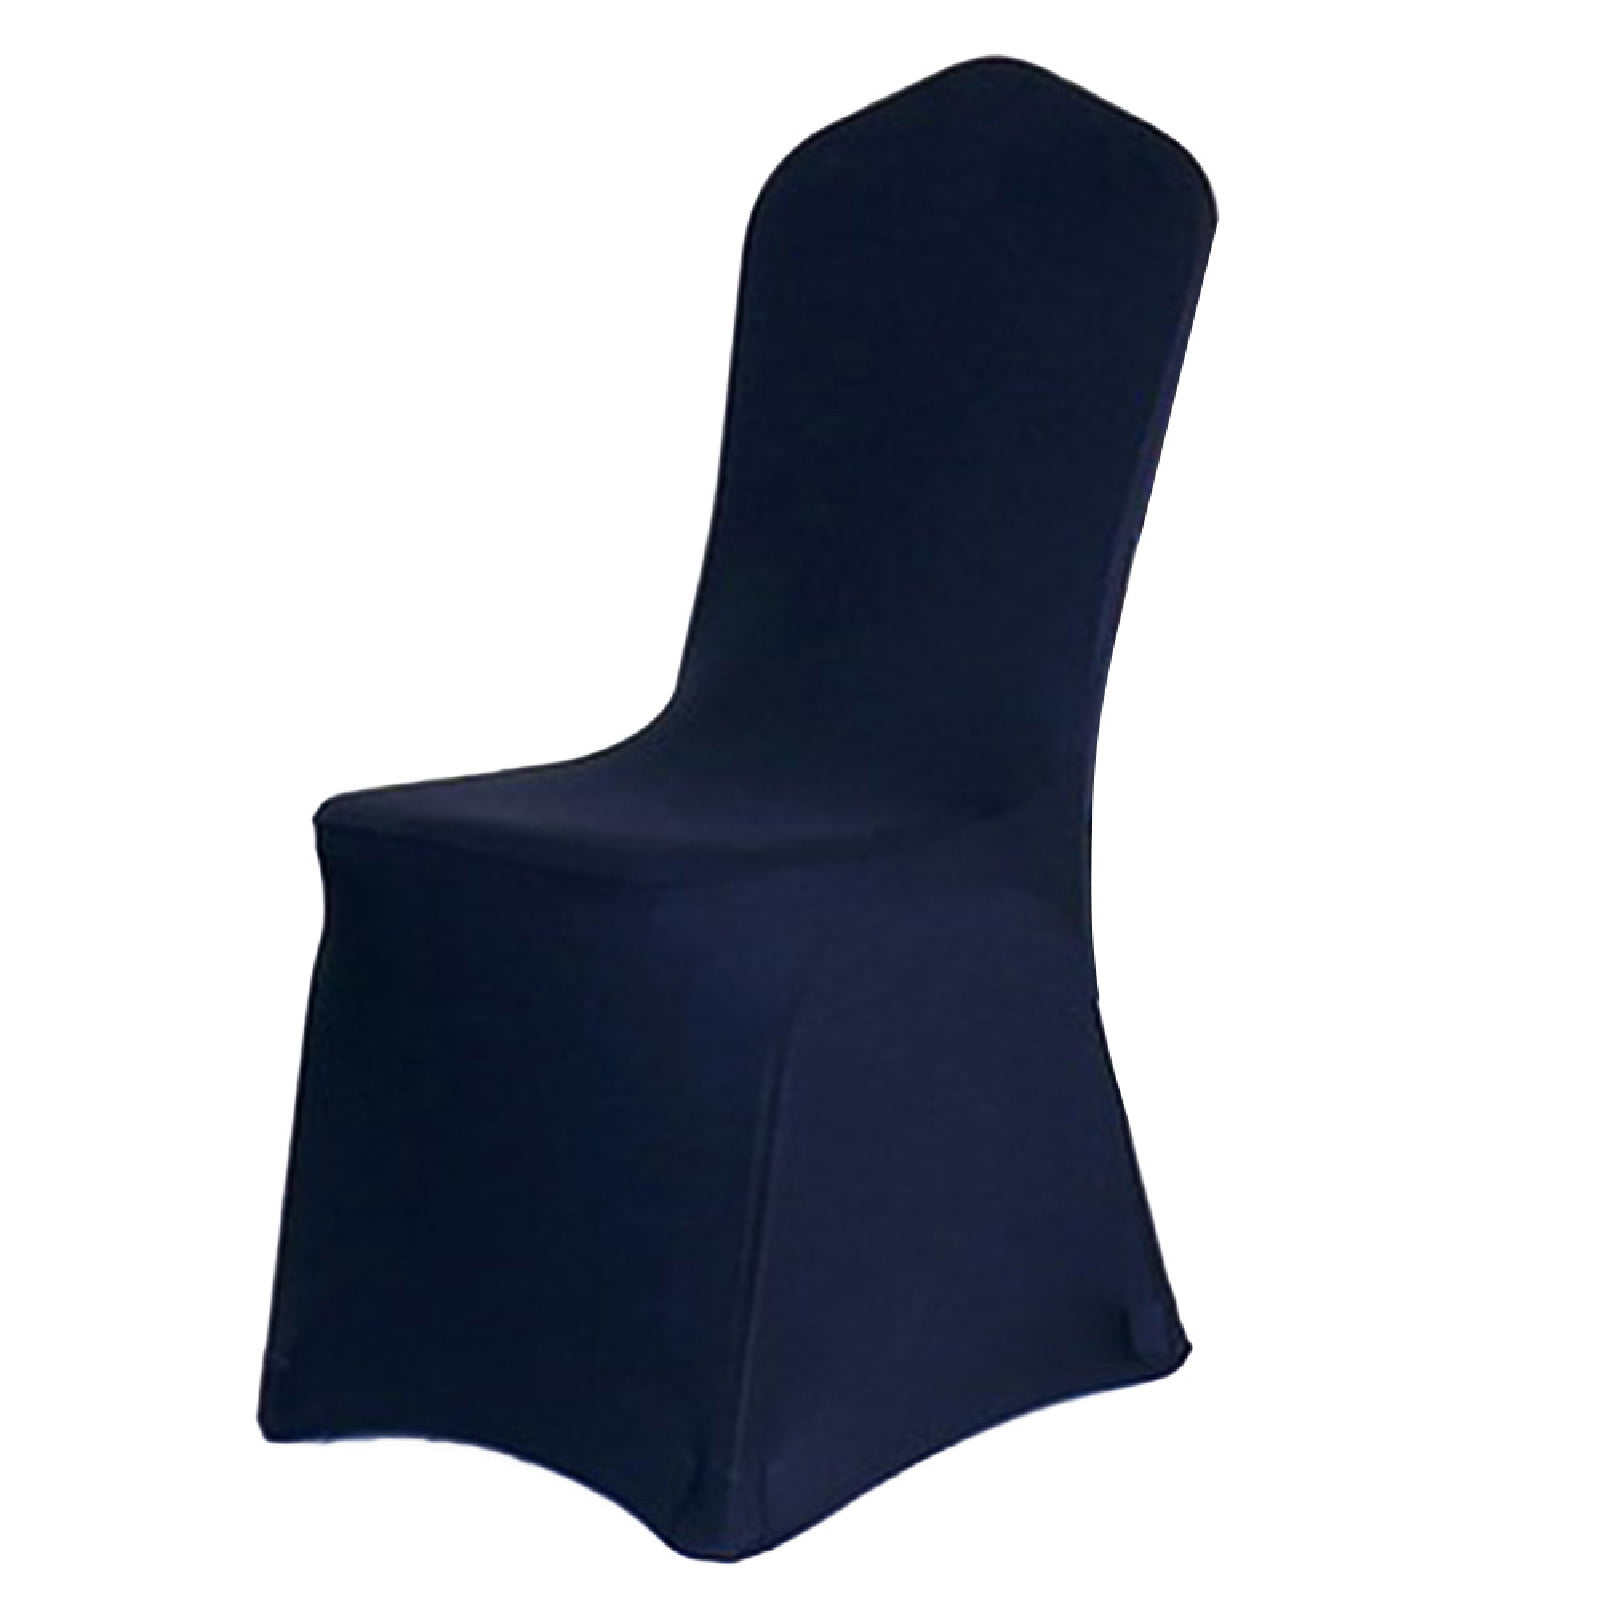 Chair Cover Stretch Universal stretchhusse Chair Cover Chair Cover Wedding DE/ 